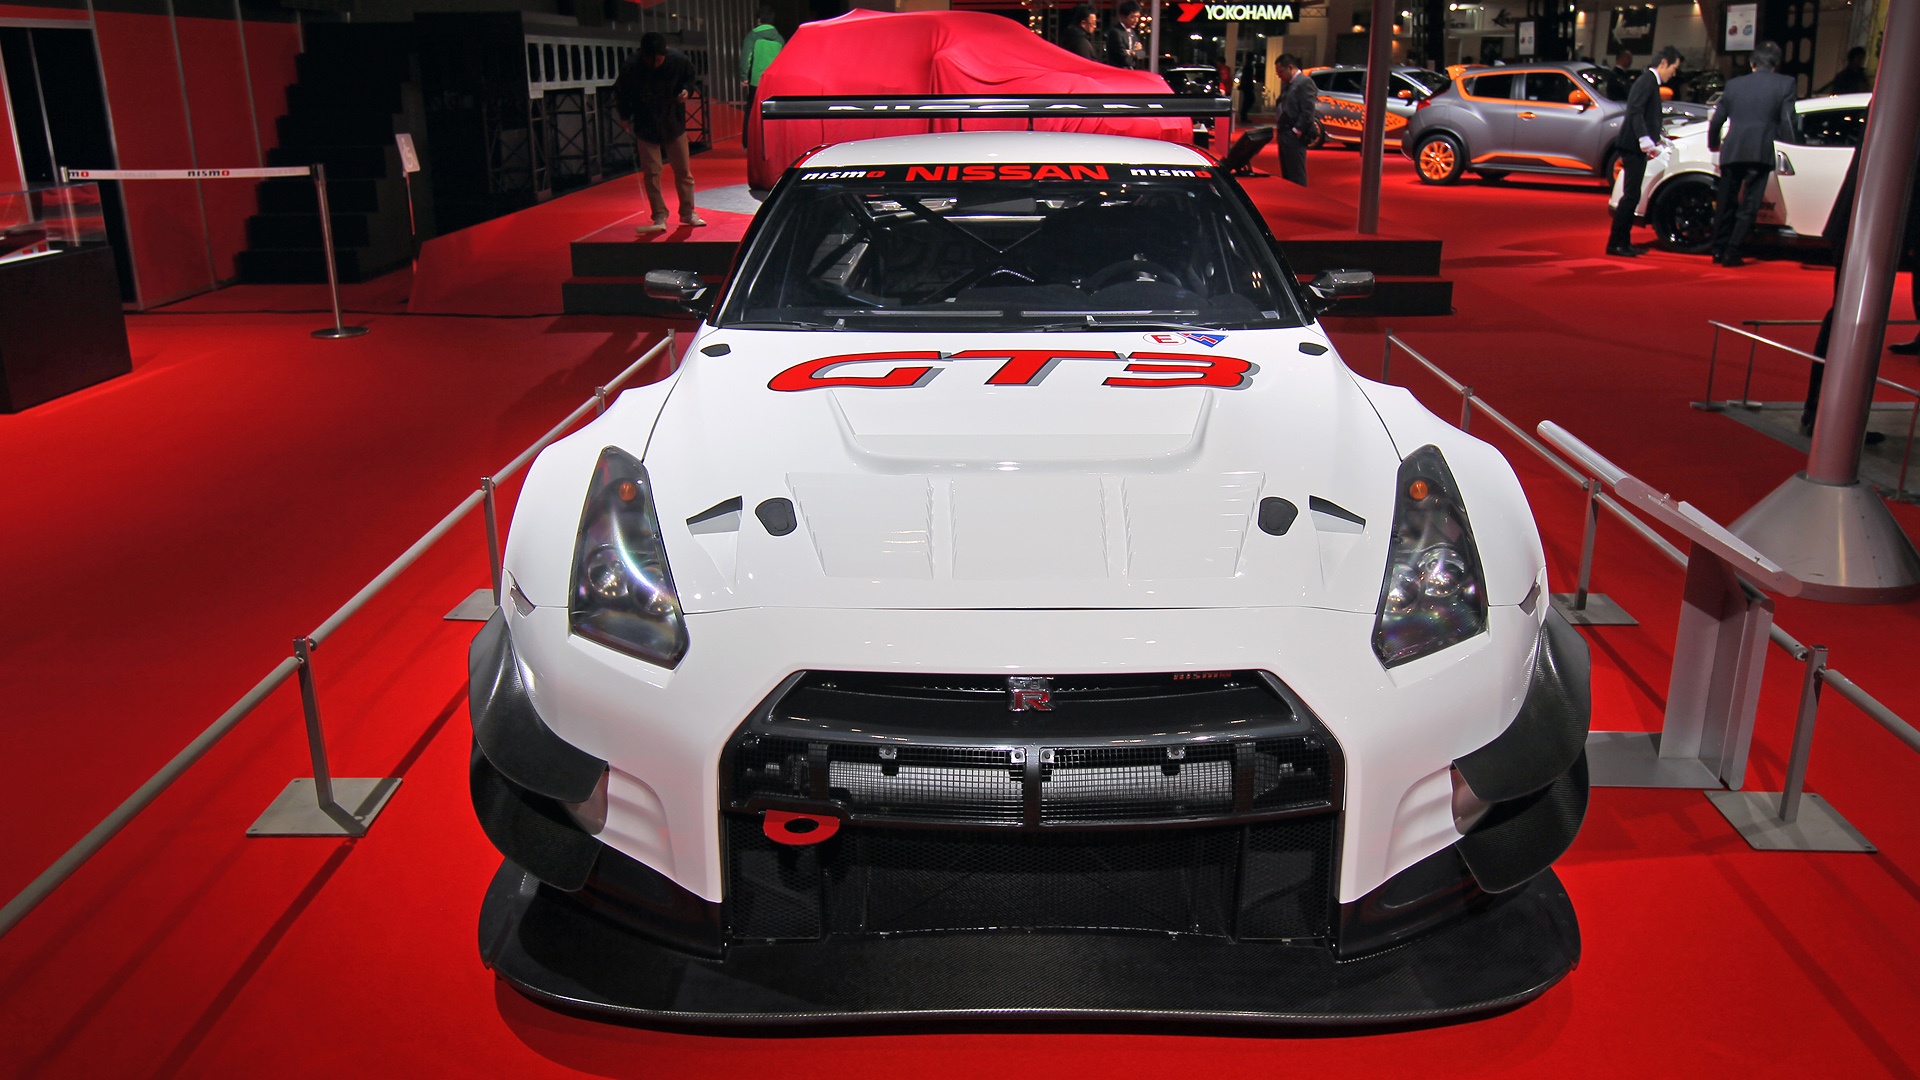 Nissan Gt R Nismo Gt3 Car Photo Instructions For